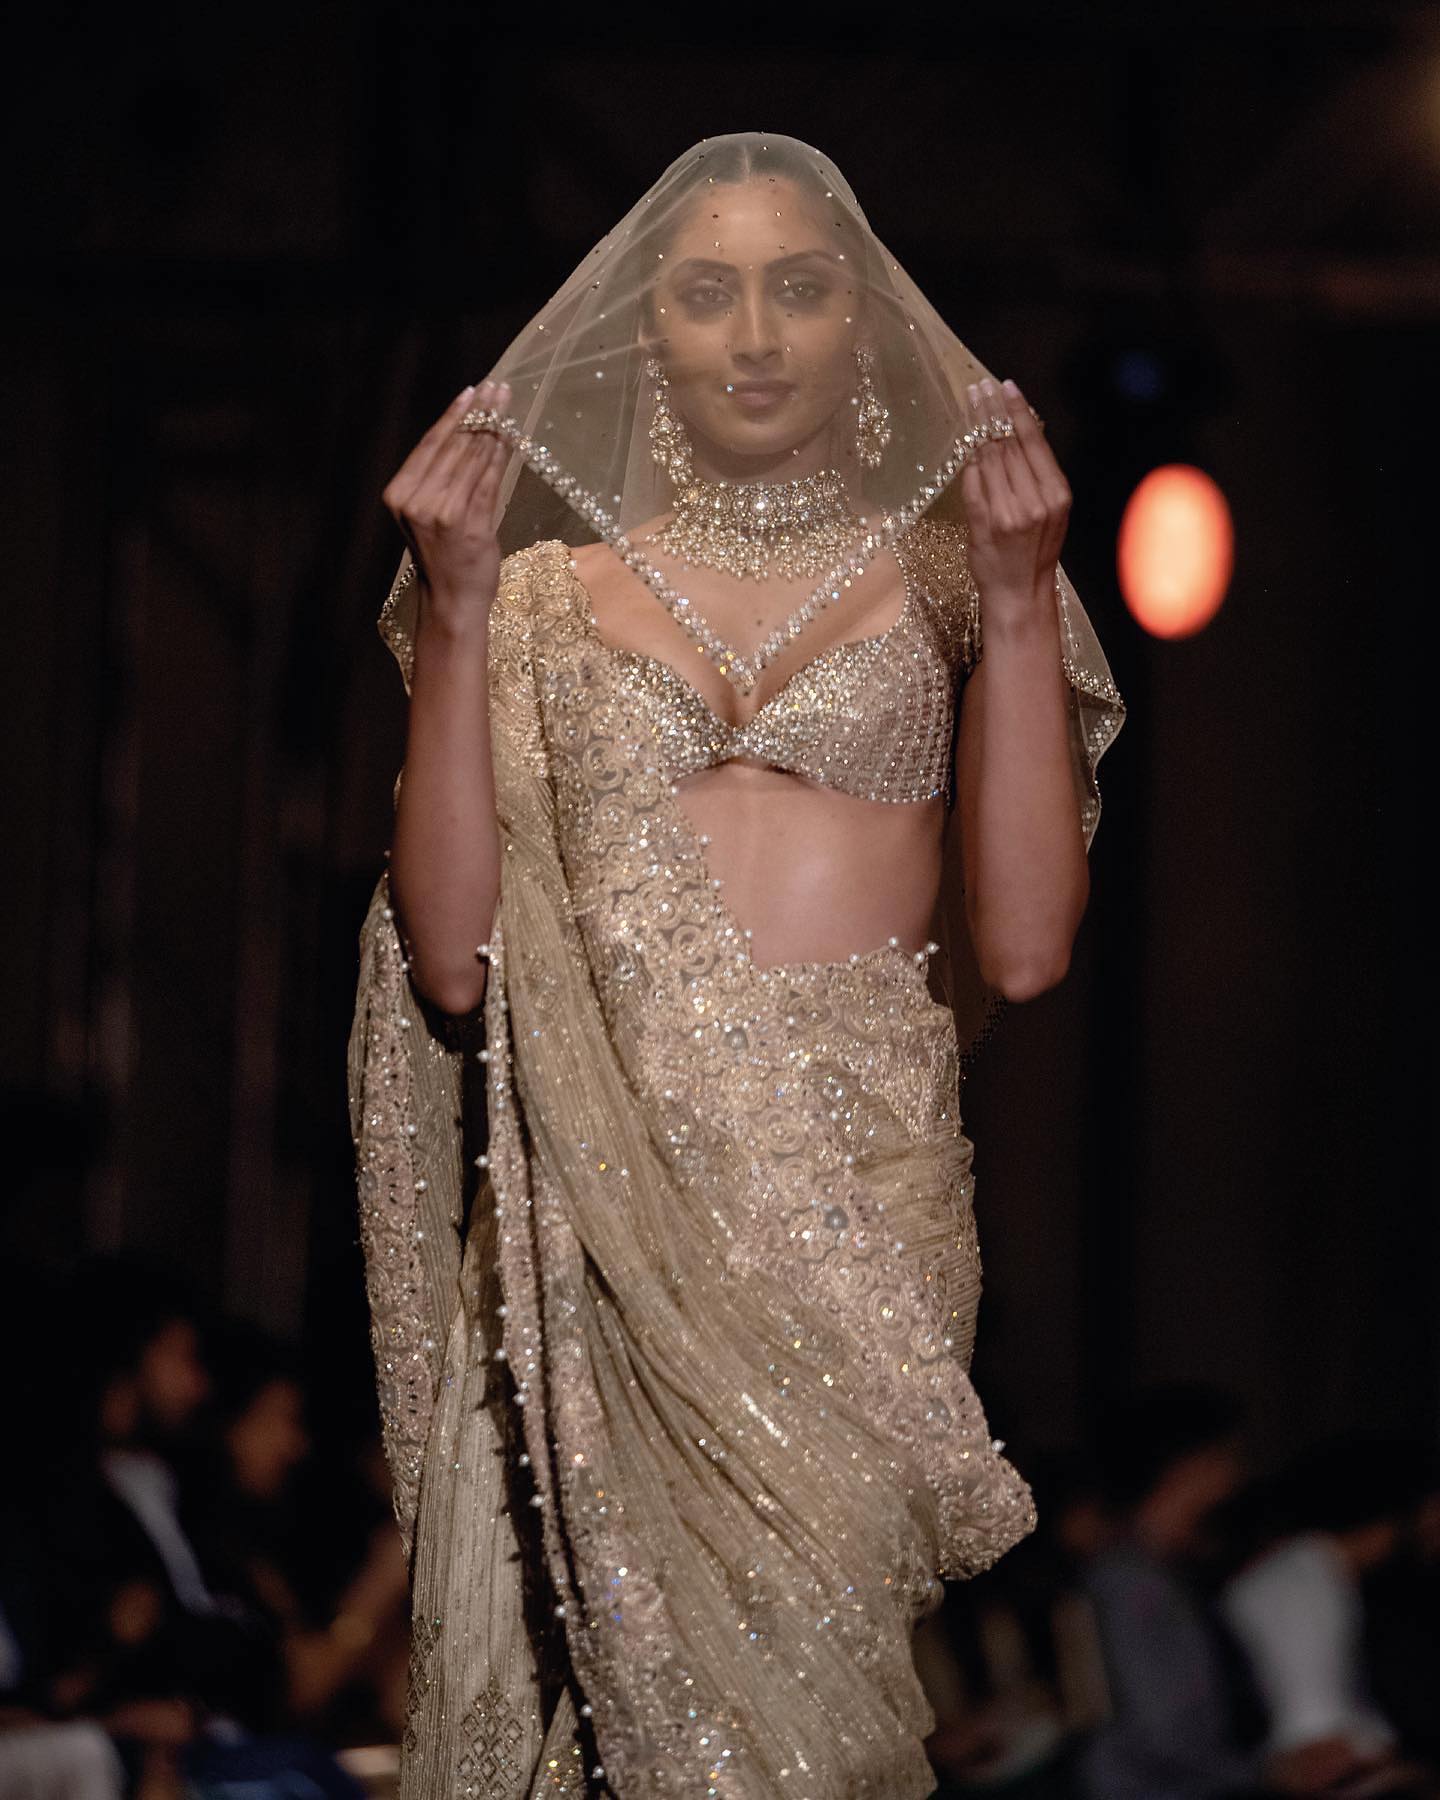 Tarun Tahiliani Unveils His Bridal Collection - The Painterly Dream